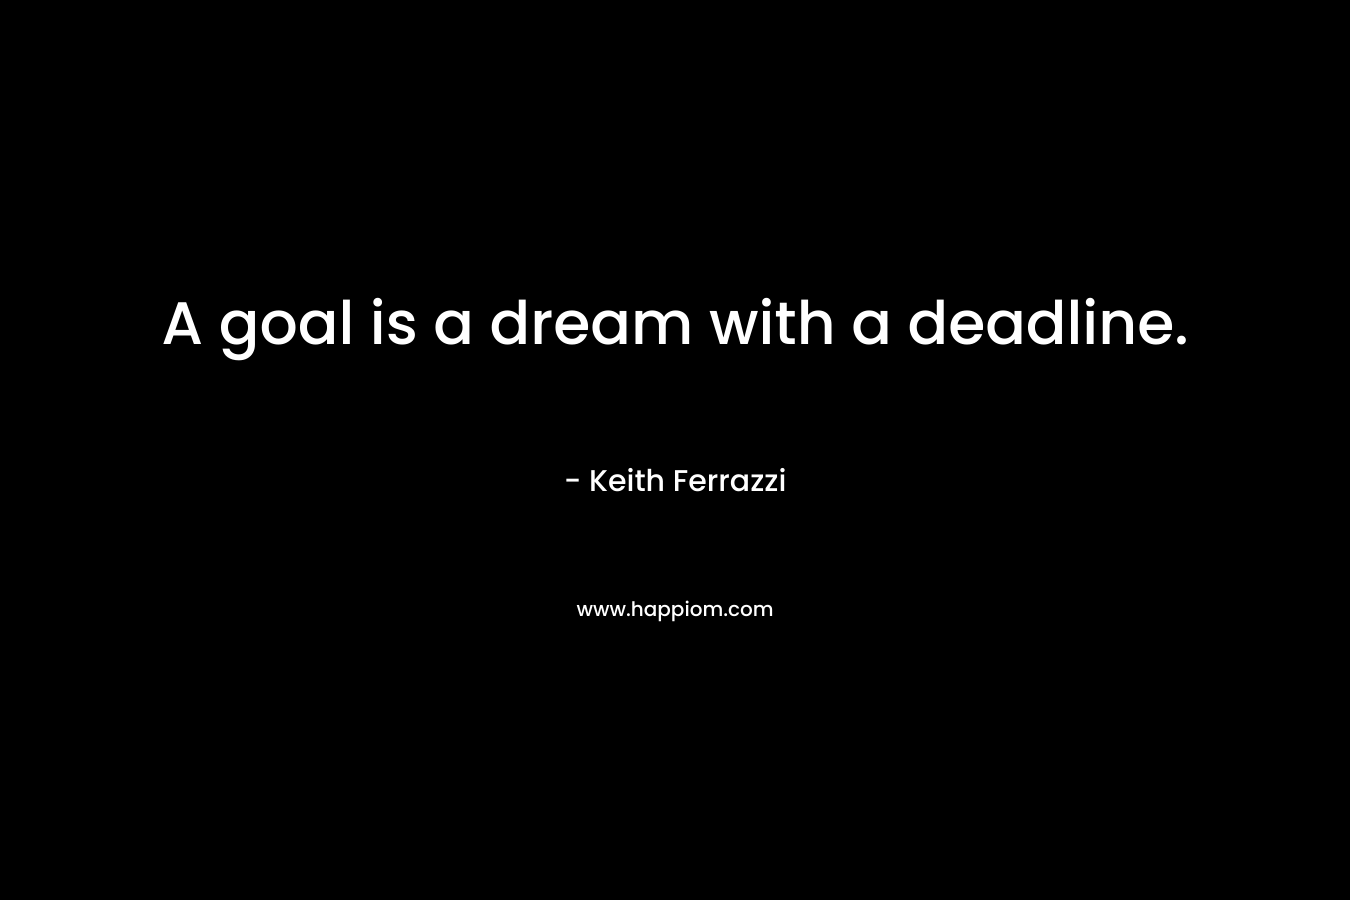 A goal is a dream with a deadline. – Keith Ferrazzi